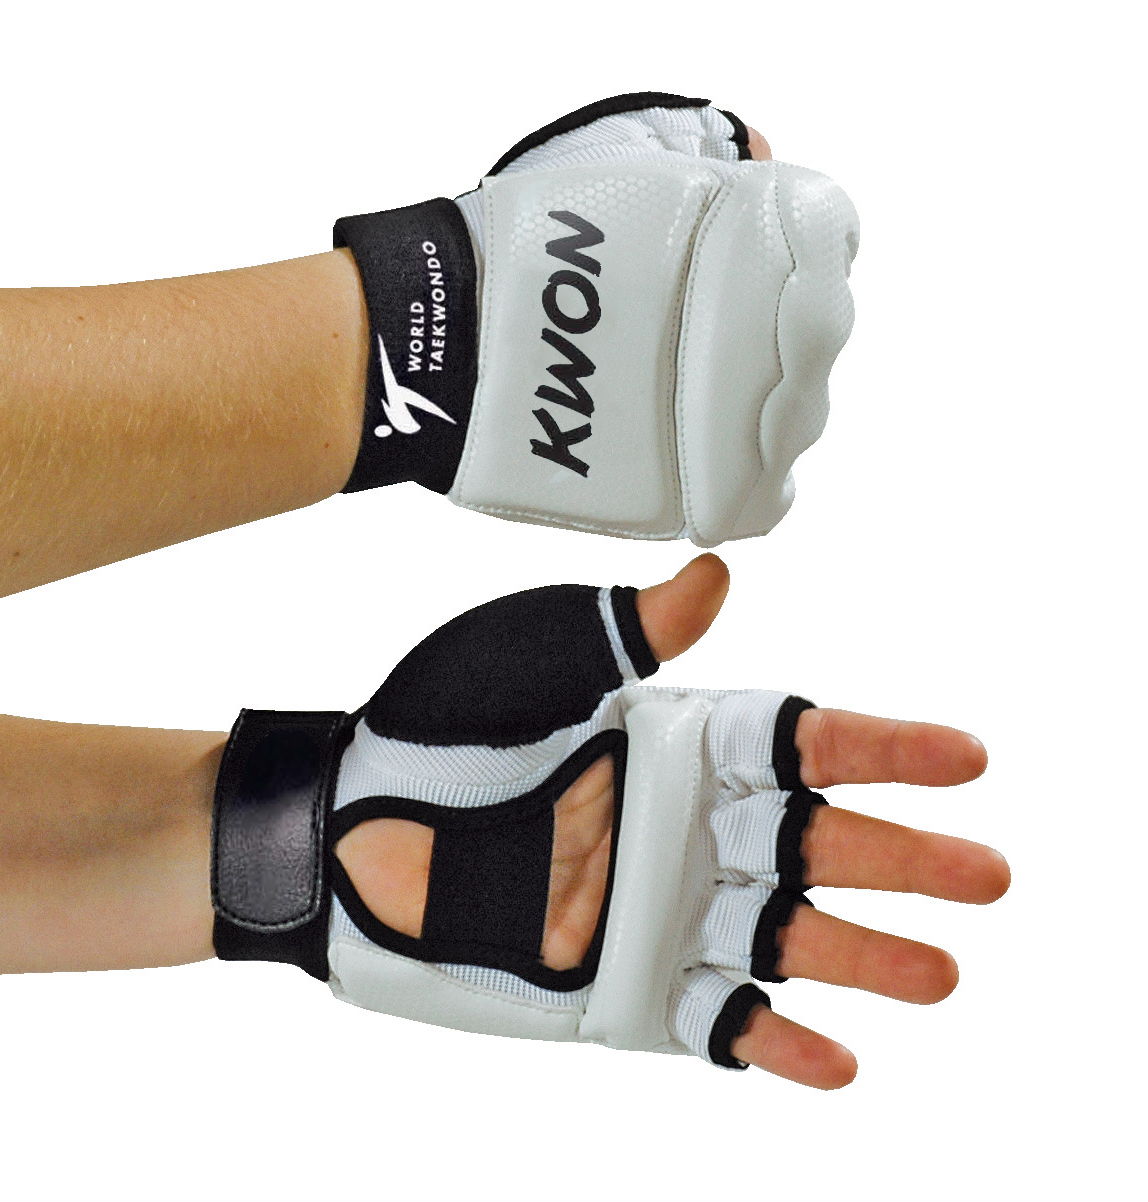 Kwon WT Approved Cometition Hand Protector - Click Image to Close